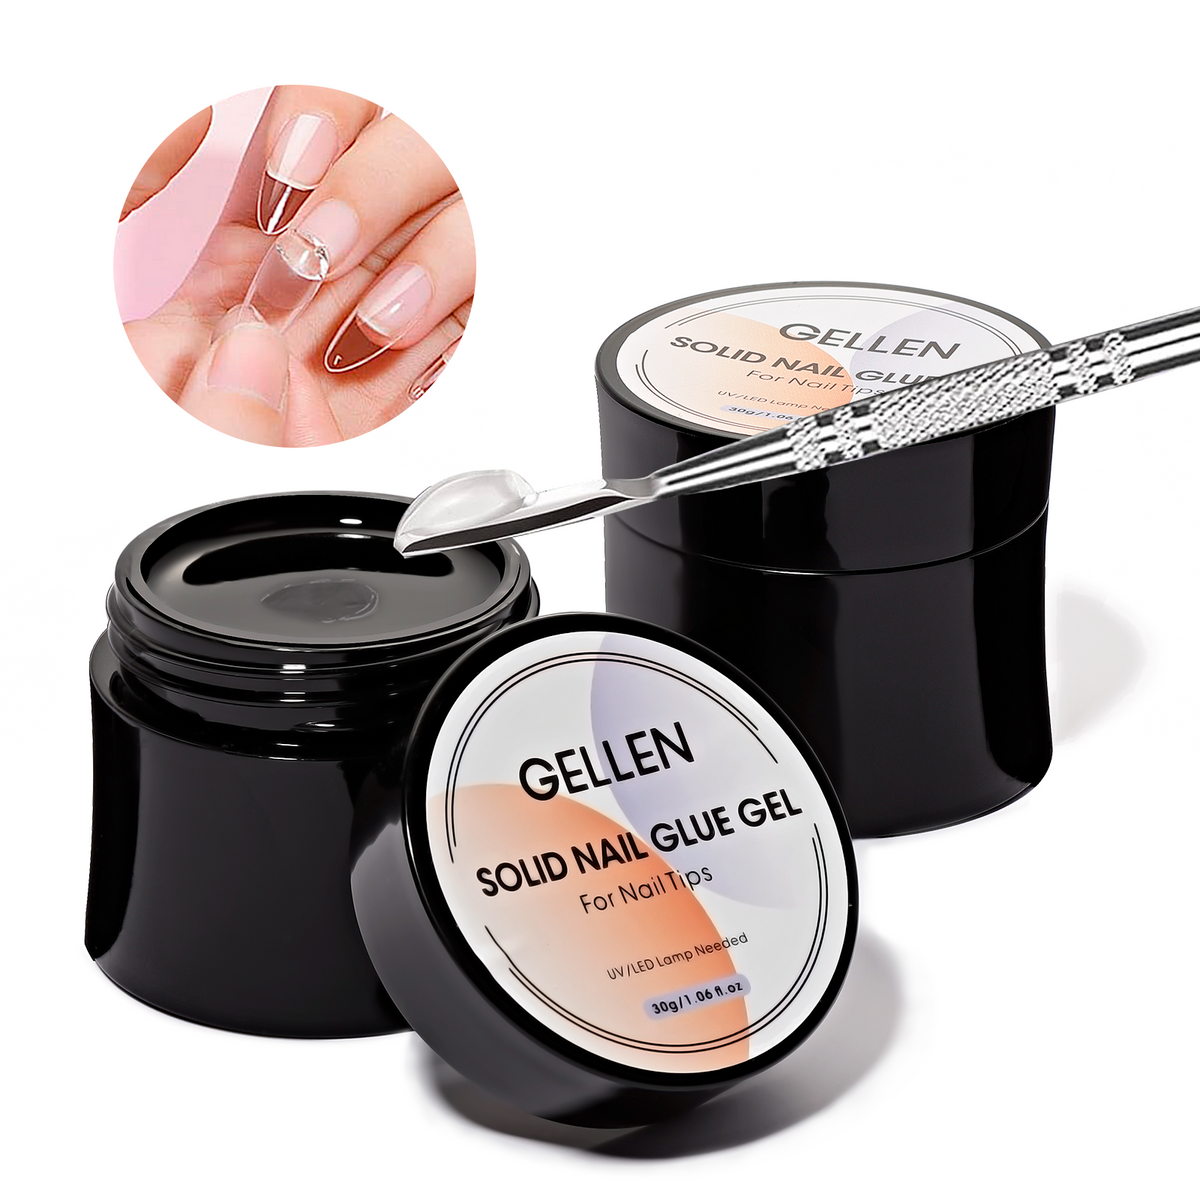 Solid Nail Glue Gel for Press ons 1pc